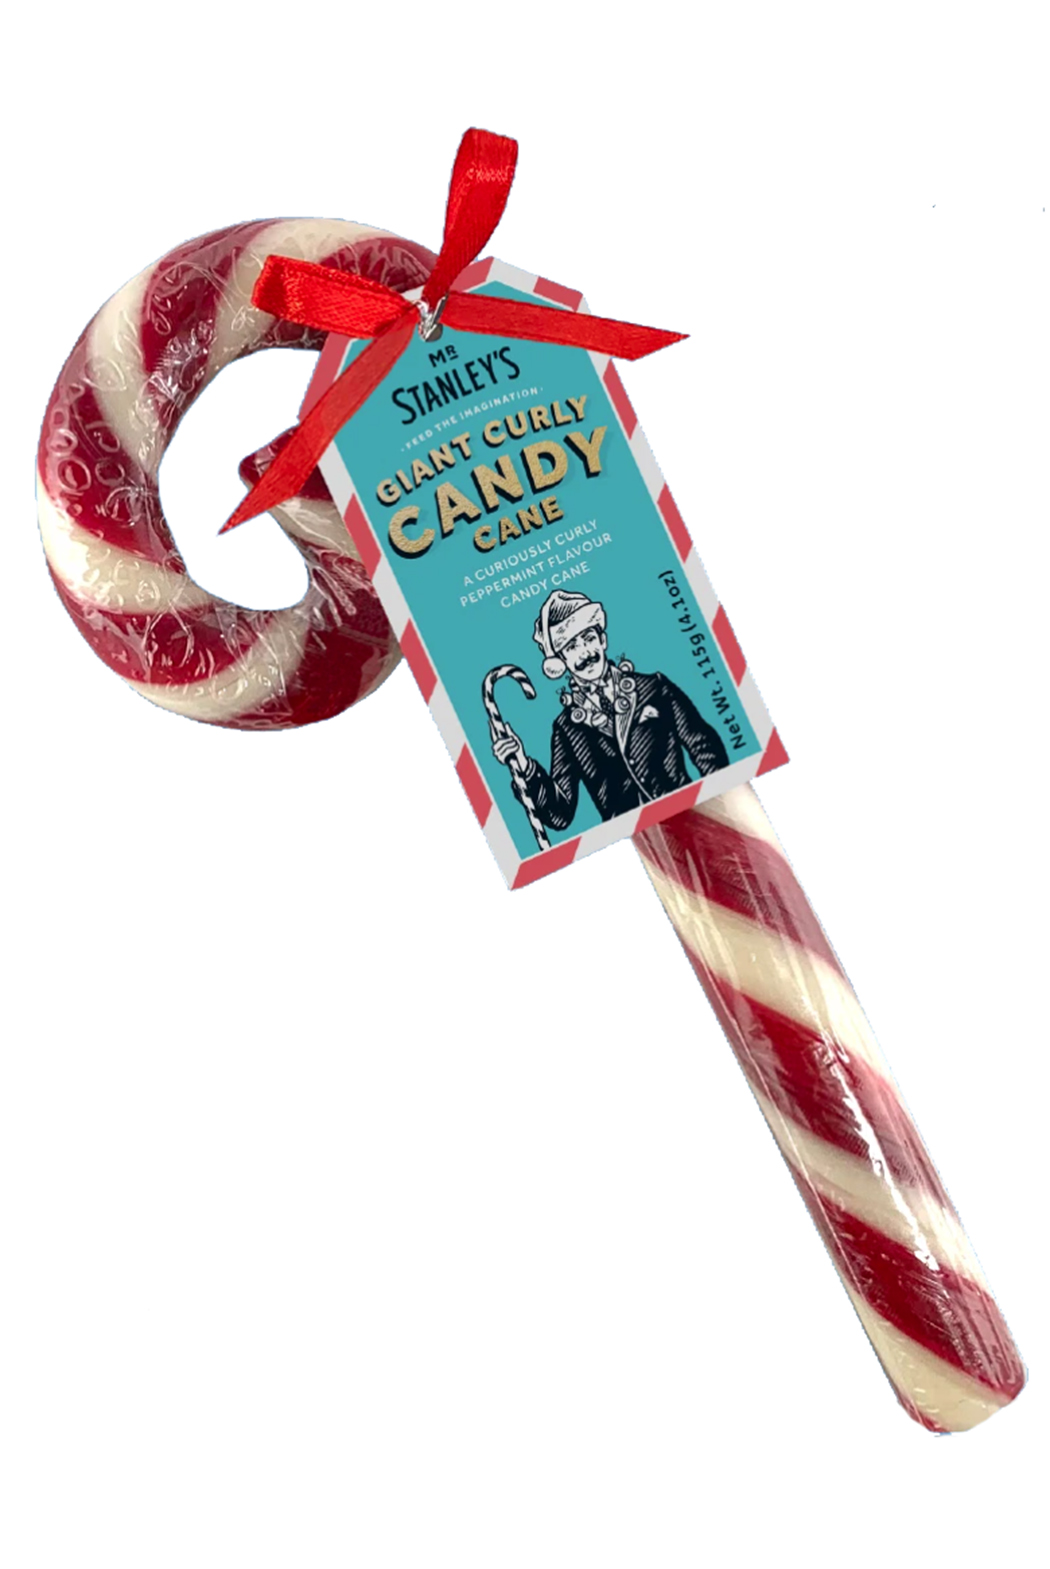 Mr Stanley's Giant Curly Candy Canes